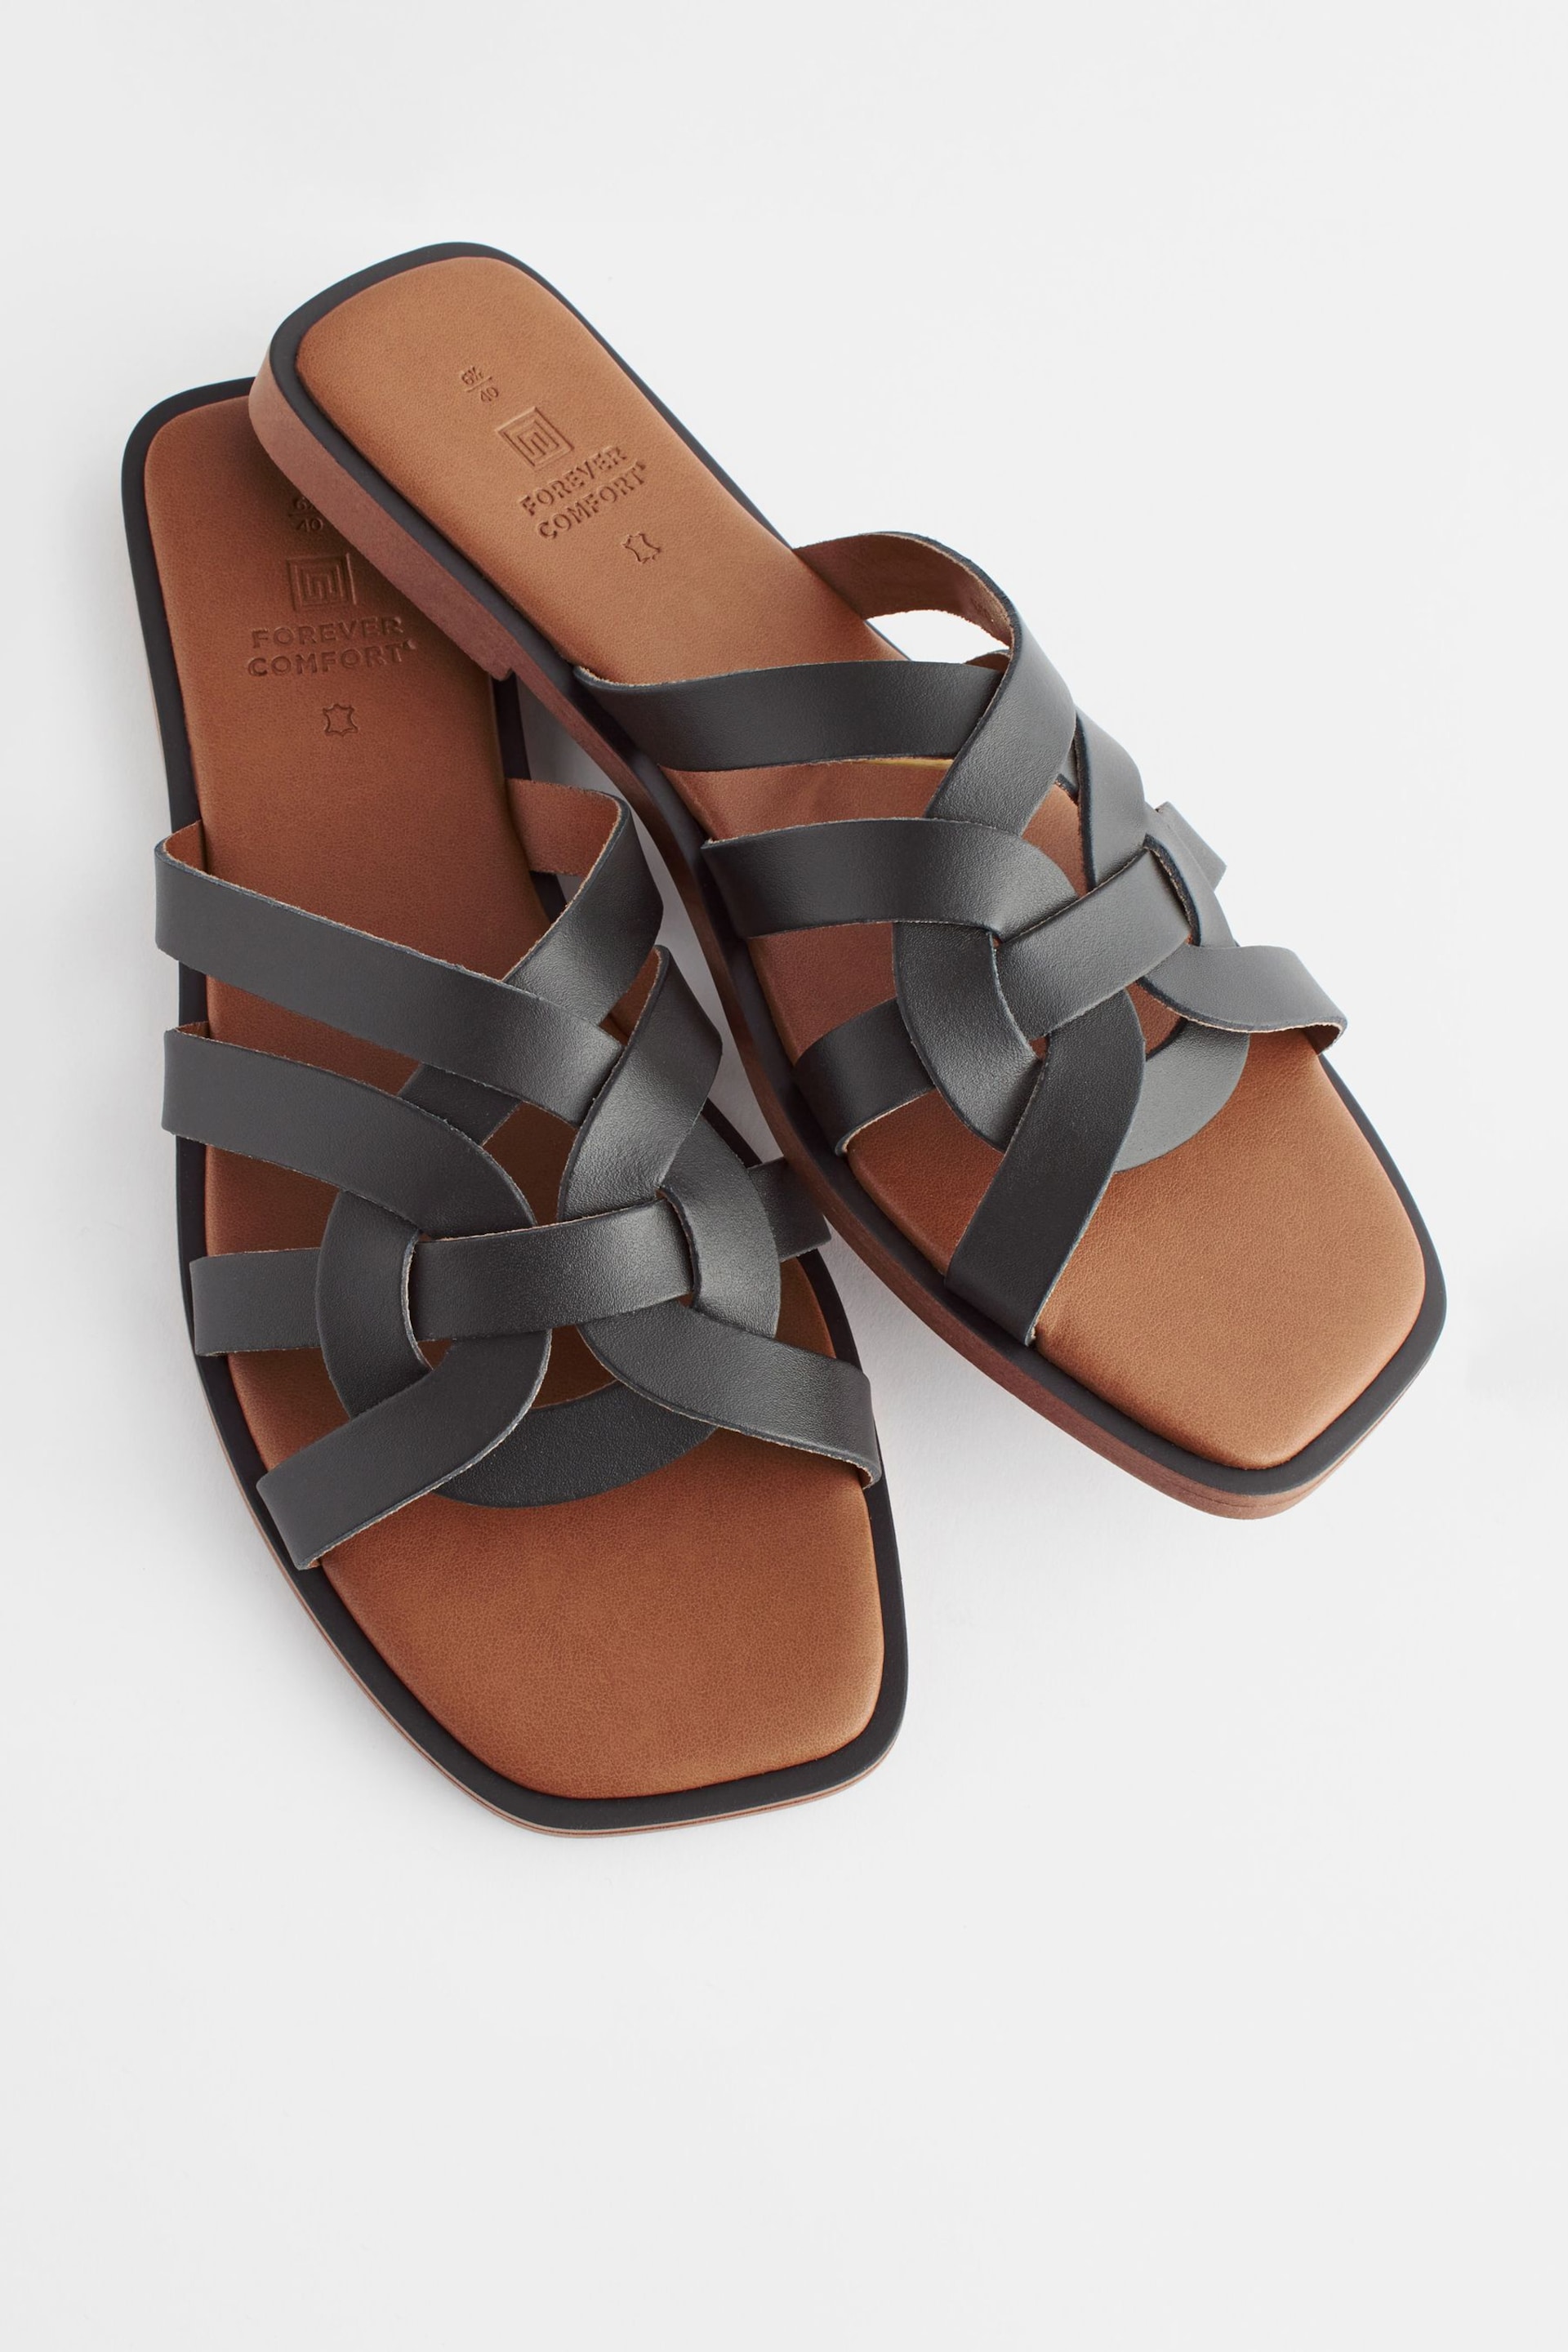 Black Extra Wide Fit Forever Comfort® Leather Lattice Mules Sandals - Image 3 of 6